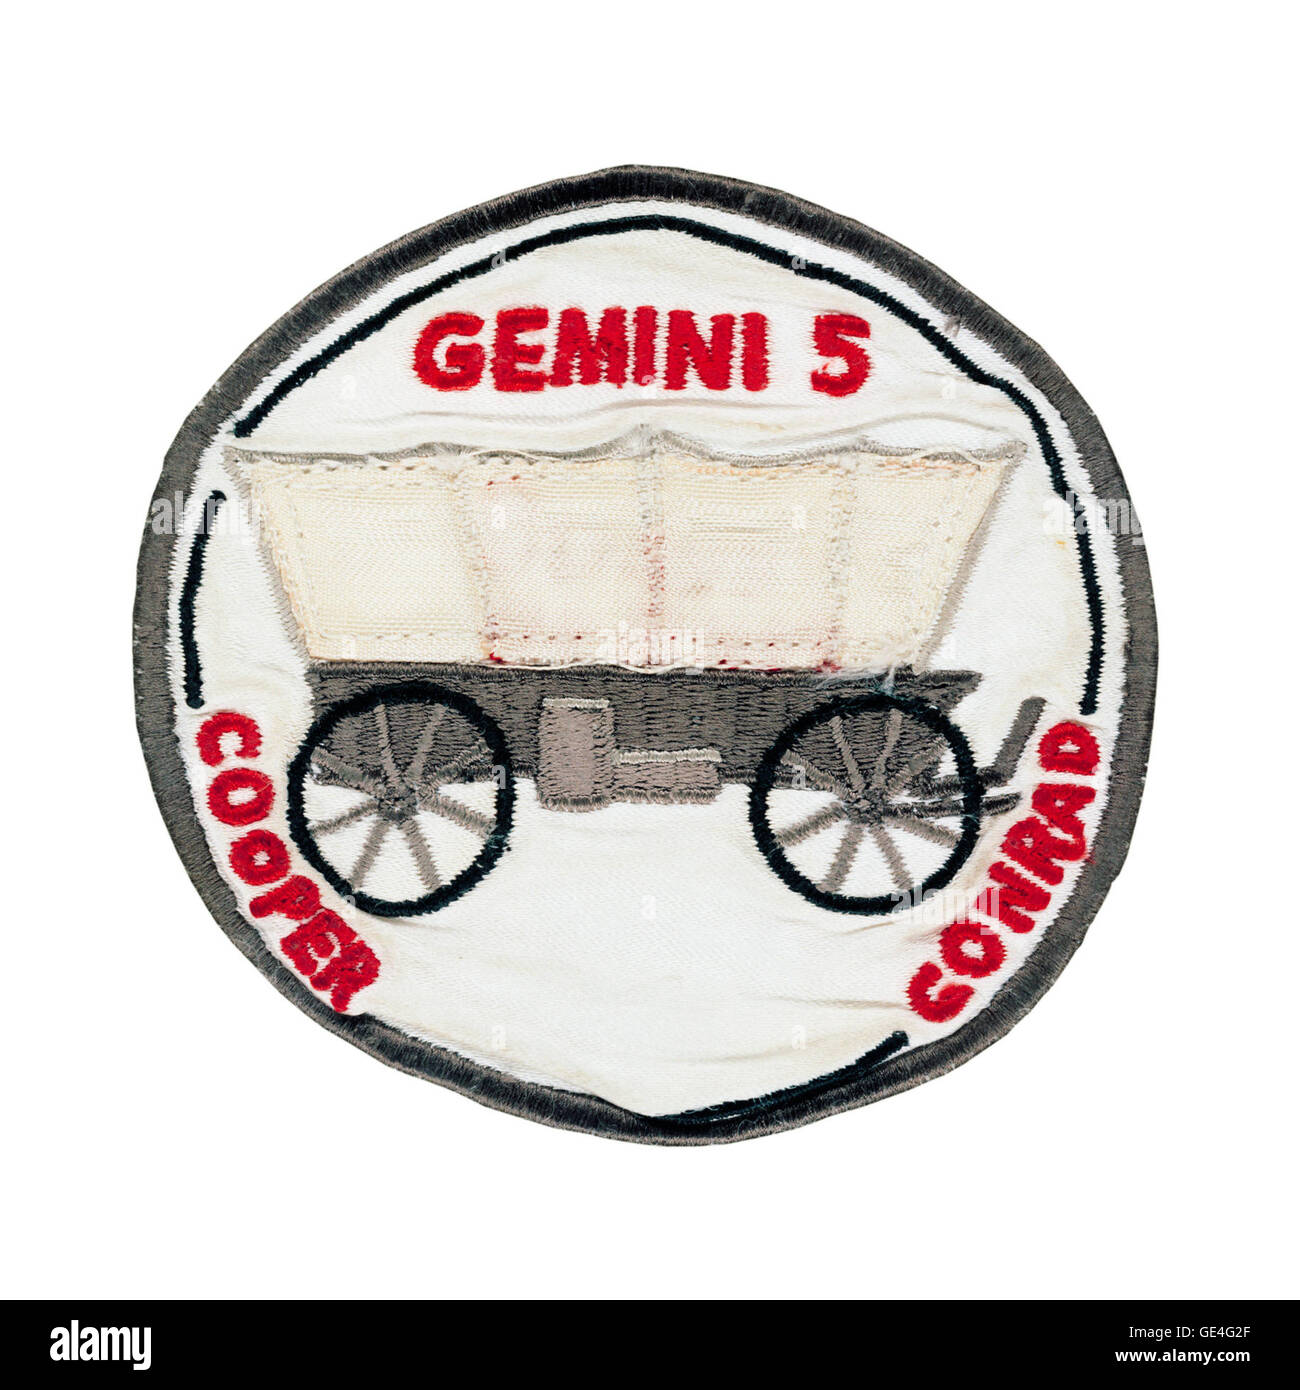 August 21-29, 1965 – 7 days, 22 hours. 55 minutes, 14 seconds Astronauts – L. Gordon Cooper, Jr. (Commander), Charles Conrad, Jr. (Pilot) The objective of the Gemini V mission was to evaluate rendezvous Guidance and Navigation (G&amp;N) system with the radar evaluation pod (REP), and to evaluate the effects of an eight day mission on equipment and the crew. The REP rendezvous was canceled after problems developed with the fuel cell.   www-pao.ksc.nasa.gov/history/gemini/gemini-5/gemini5.htm ( http://www-pao.ksc.nasa.gov/history/gemini/gemini-5/gemini5.htm ) Stock Photo